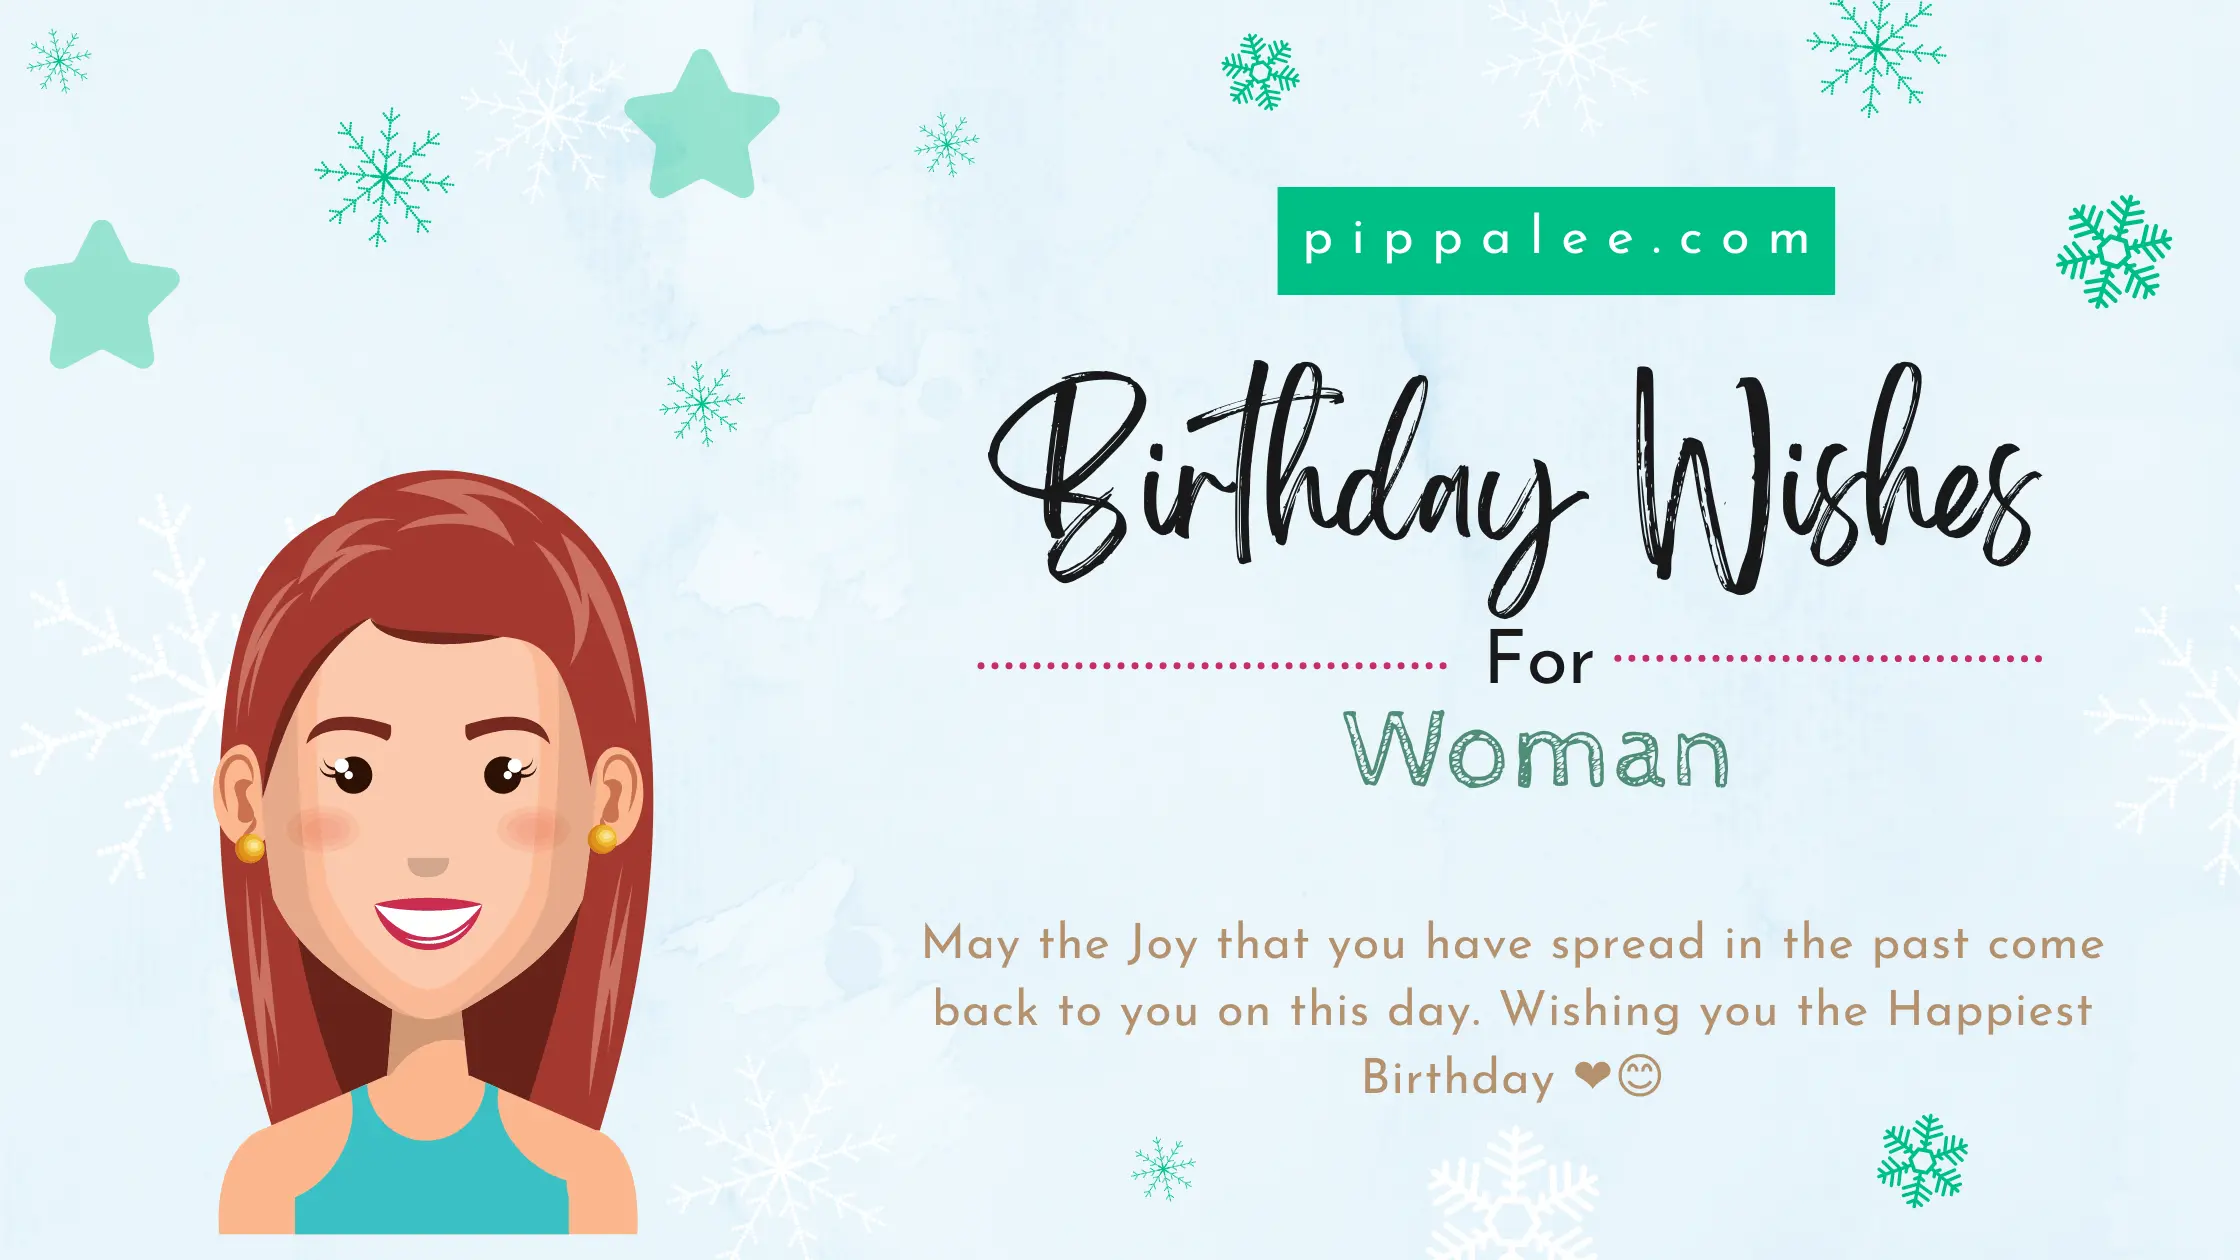 Birthday Wishes For Woman - Special Messages